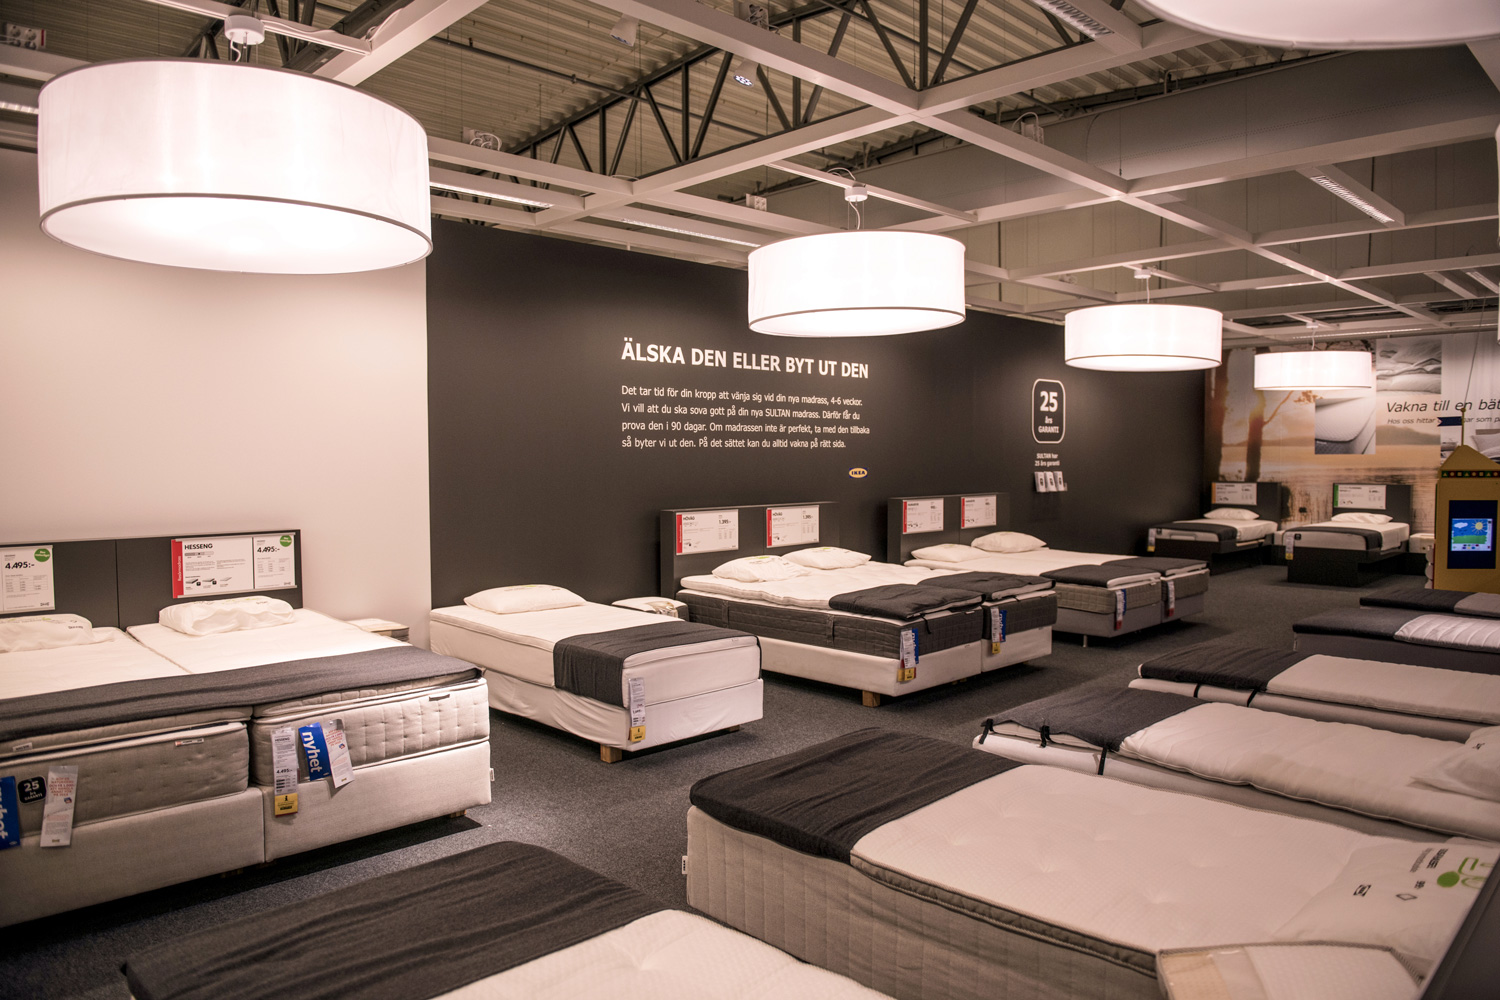 IKEA beds are seen at the Ikea store